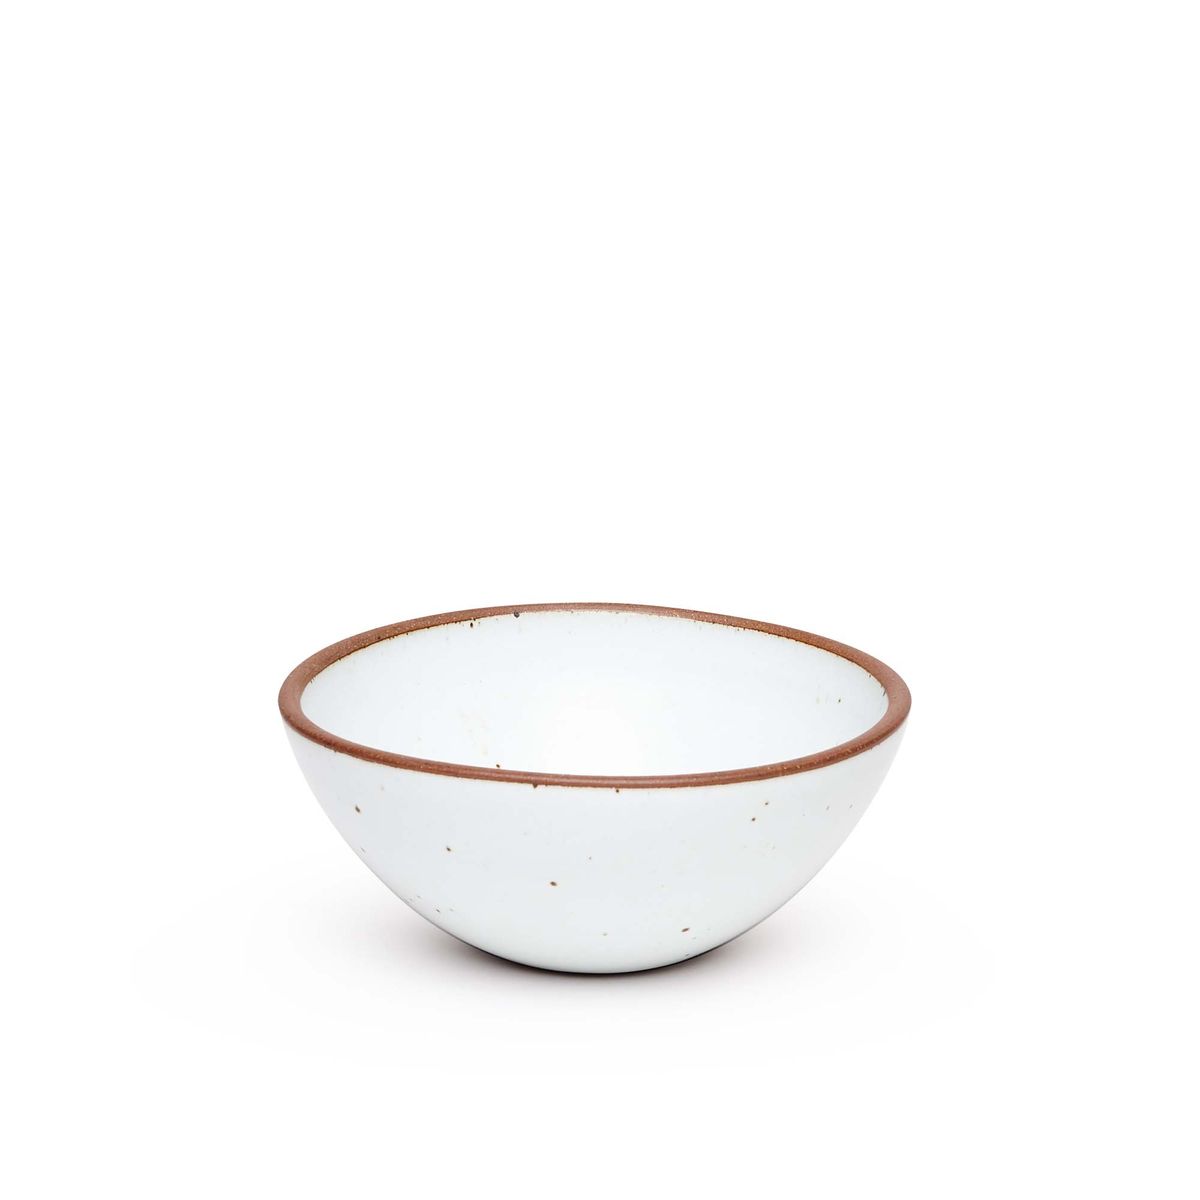 A medium rounded ceramic bowl in a cool white color featuring iron speckles and an unglazed rim